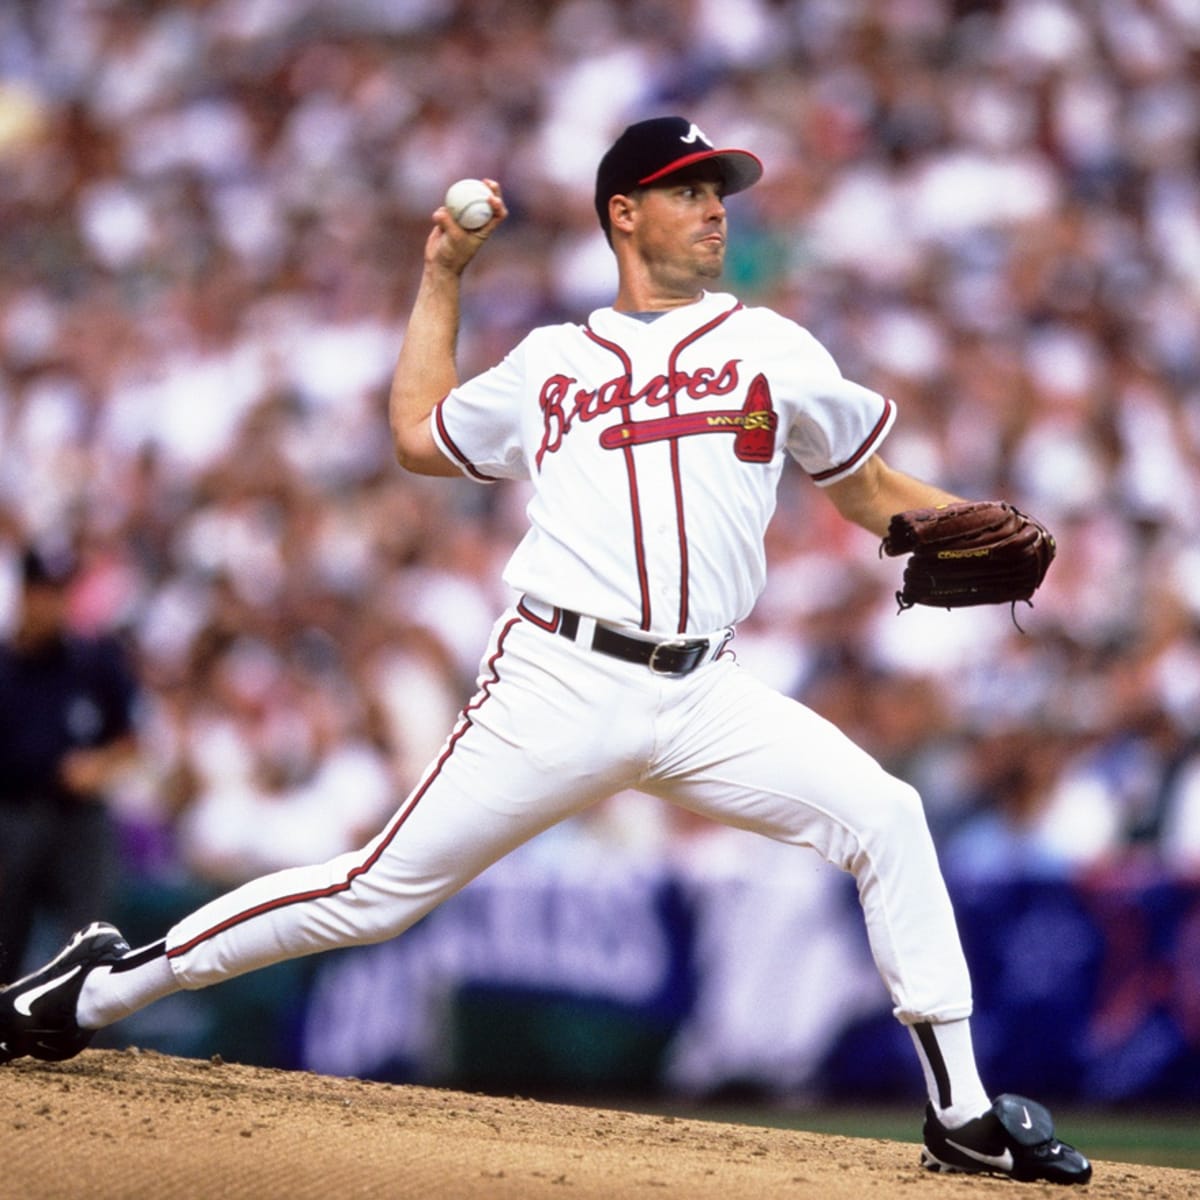 Atlanta Braves legend Greg Maddux planned to sign with New York